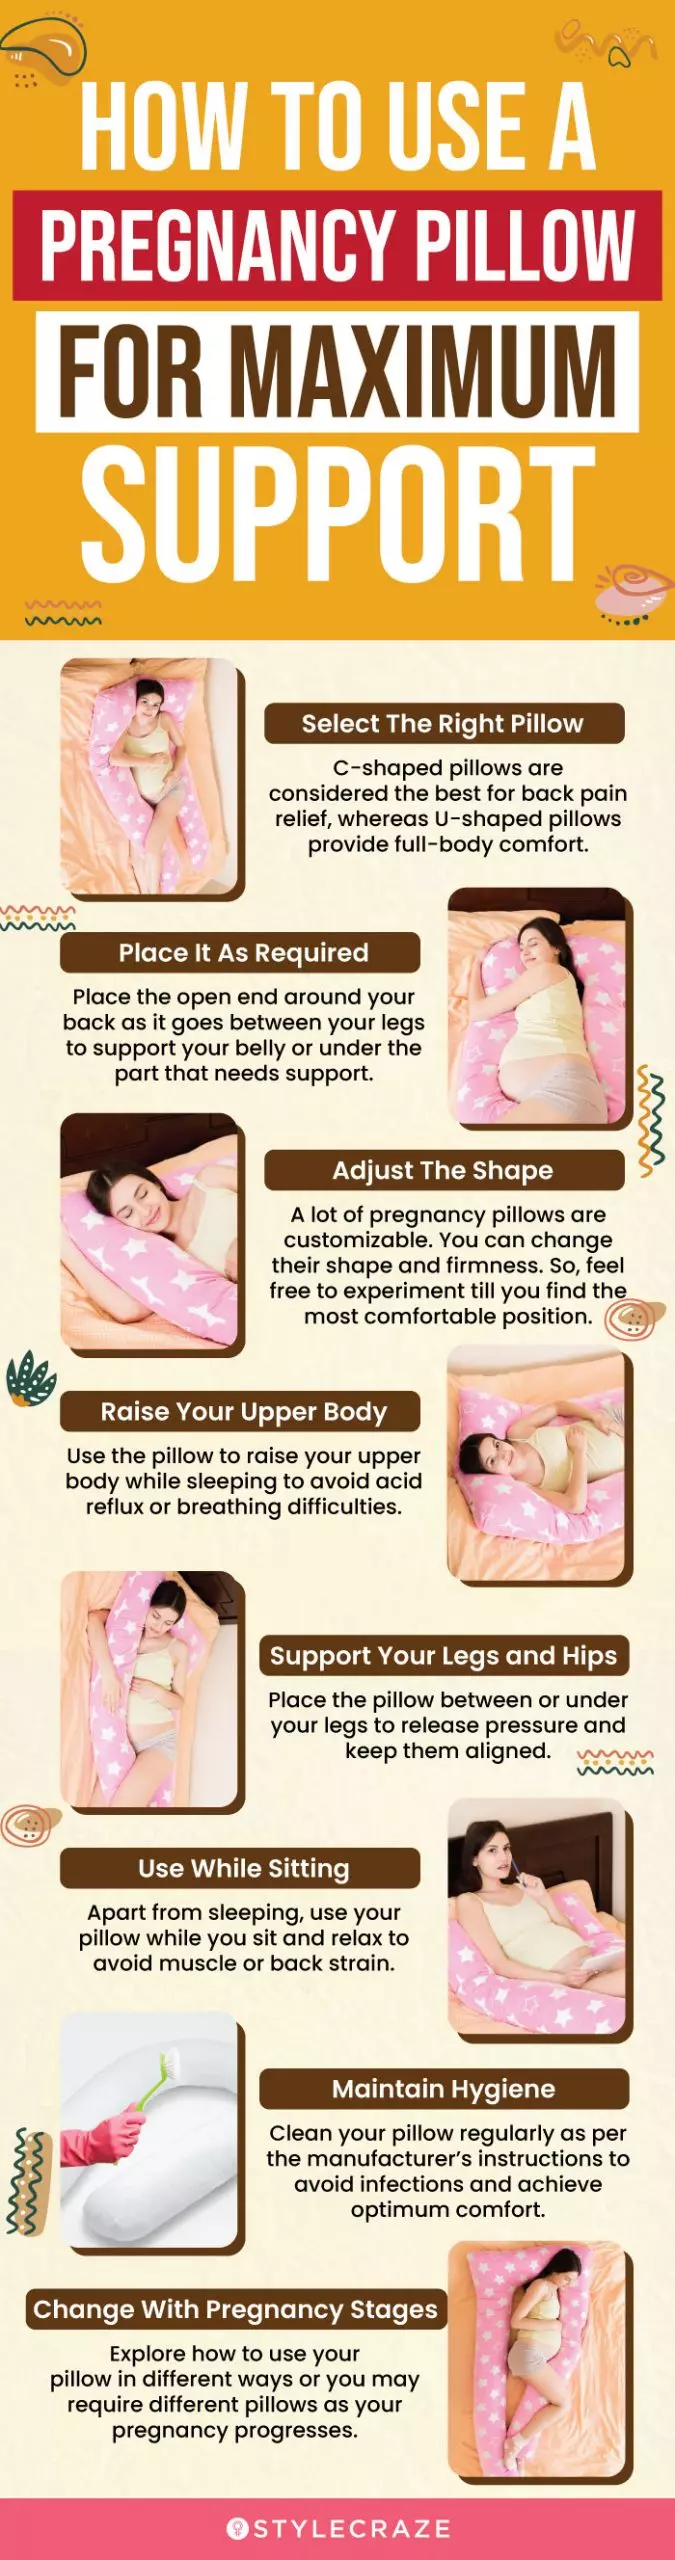 How To Use A Pregnancy Pillow For Maximum Support (infographic)